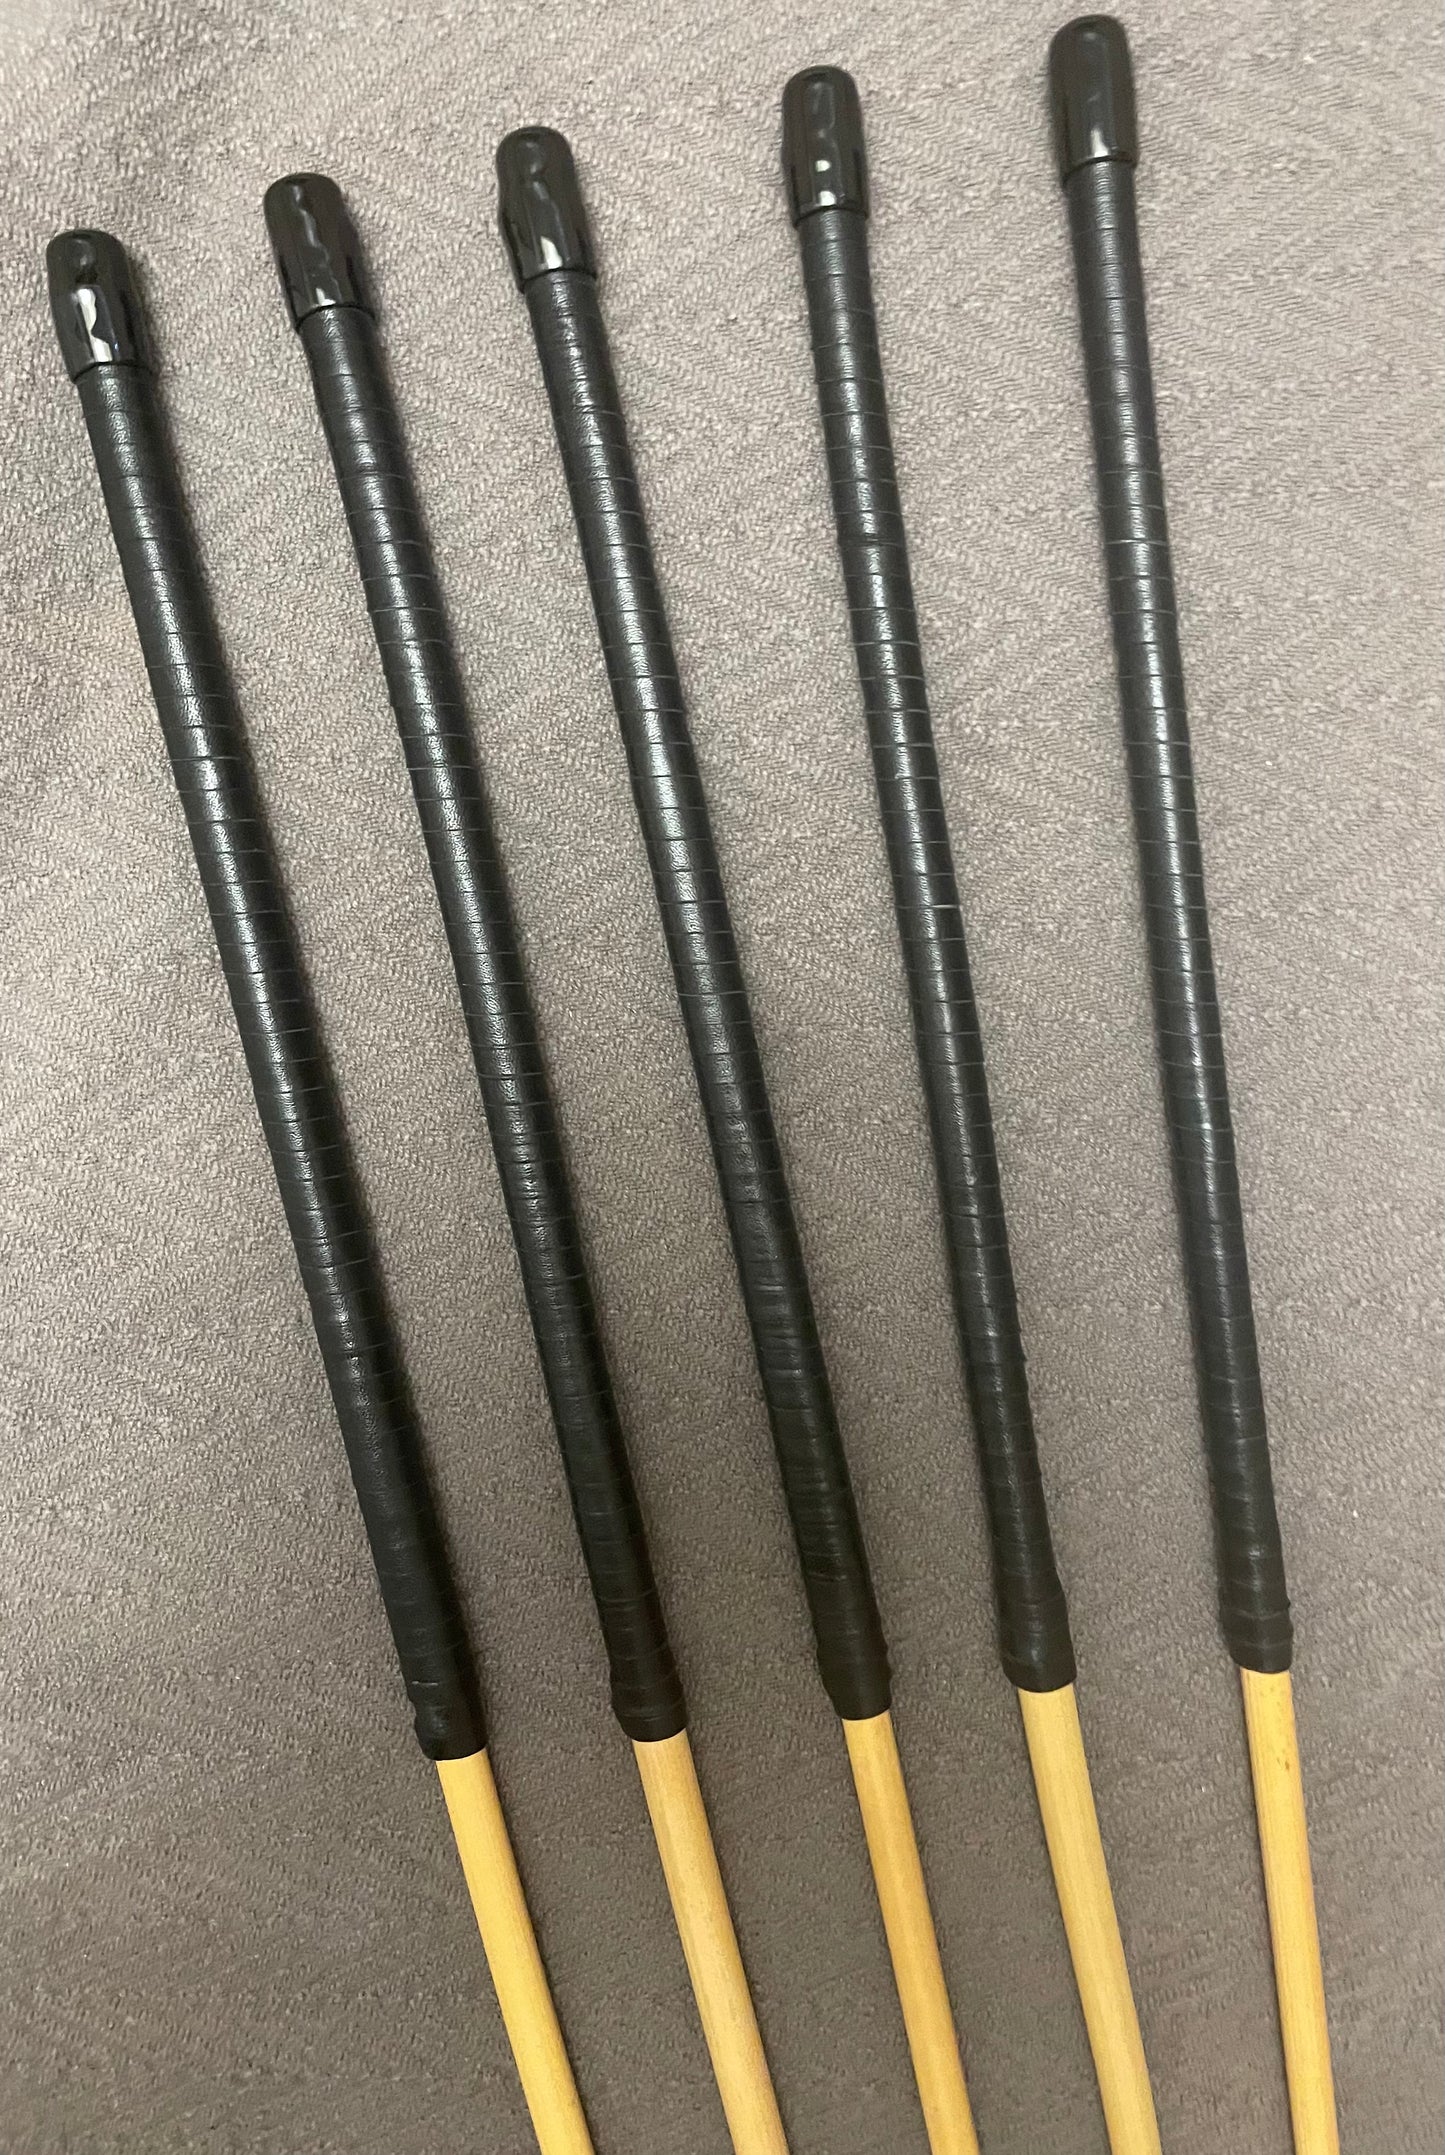 Knotless Dragon Canes / No Knot Rattan Canes / Ultimate Dragon Canes / BDSM Canes Set of 5 - 83 to 85 cms Length - Black Kangaroo Leather Handles - Englishvice Canes